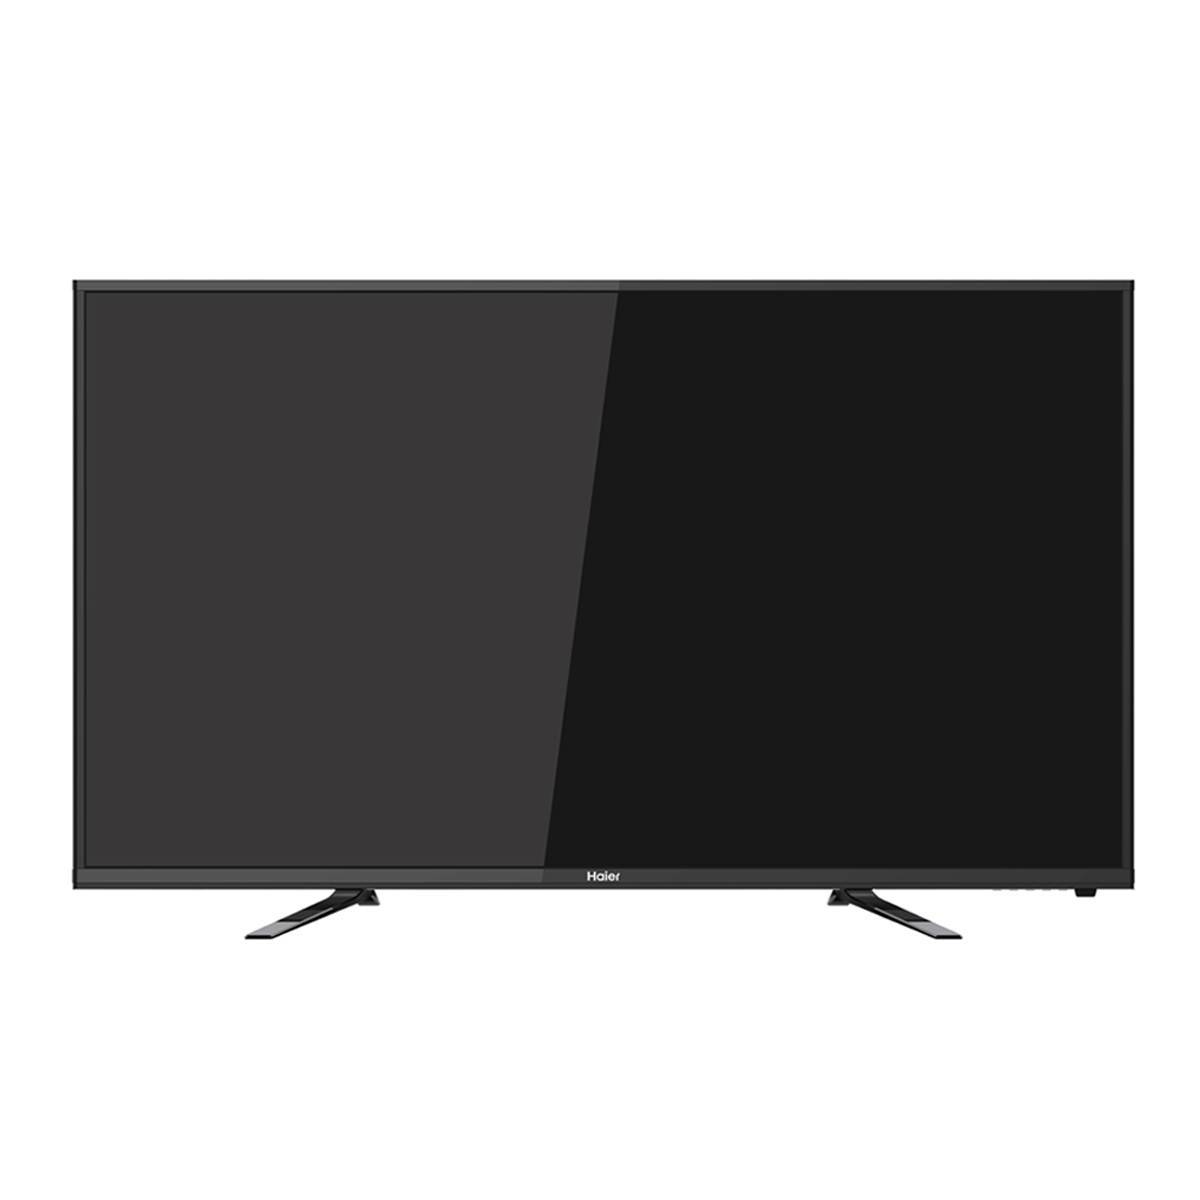 le50b8500-50-full-hd-1080p-led-tv-with-multi-hdmi-coannnections-haier-brand-price-in-pakistan.jpg